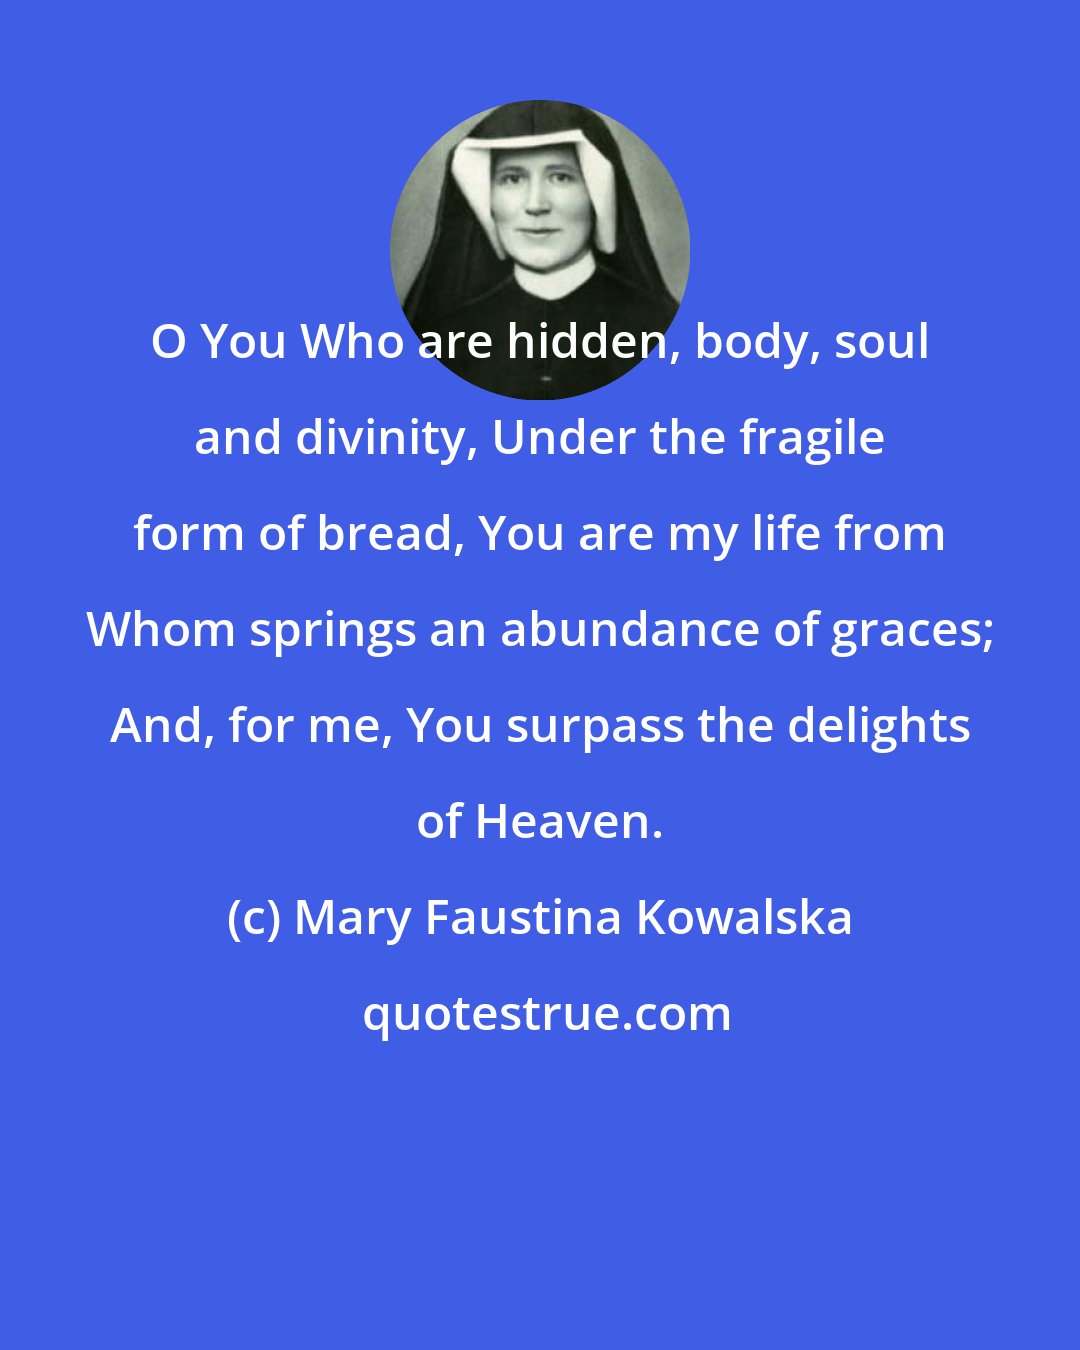 Mary Faustina Kowalska: O You Who are hidden, body, soul and divinity, Under the fragile form of bread, You are my life from Whom springs an abundance of graces; And, for me, You surpass the delights of Heaven.